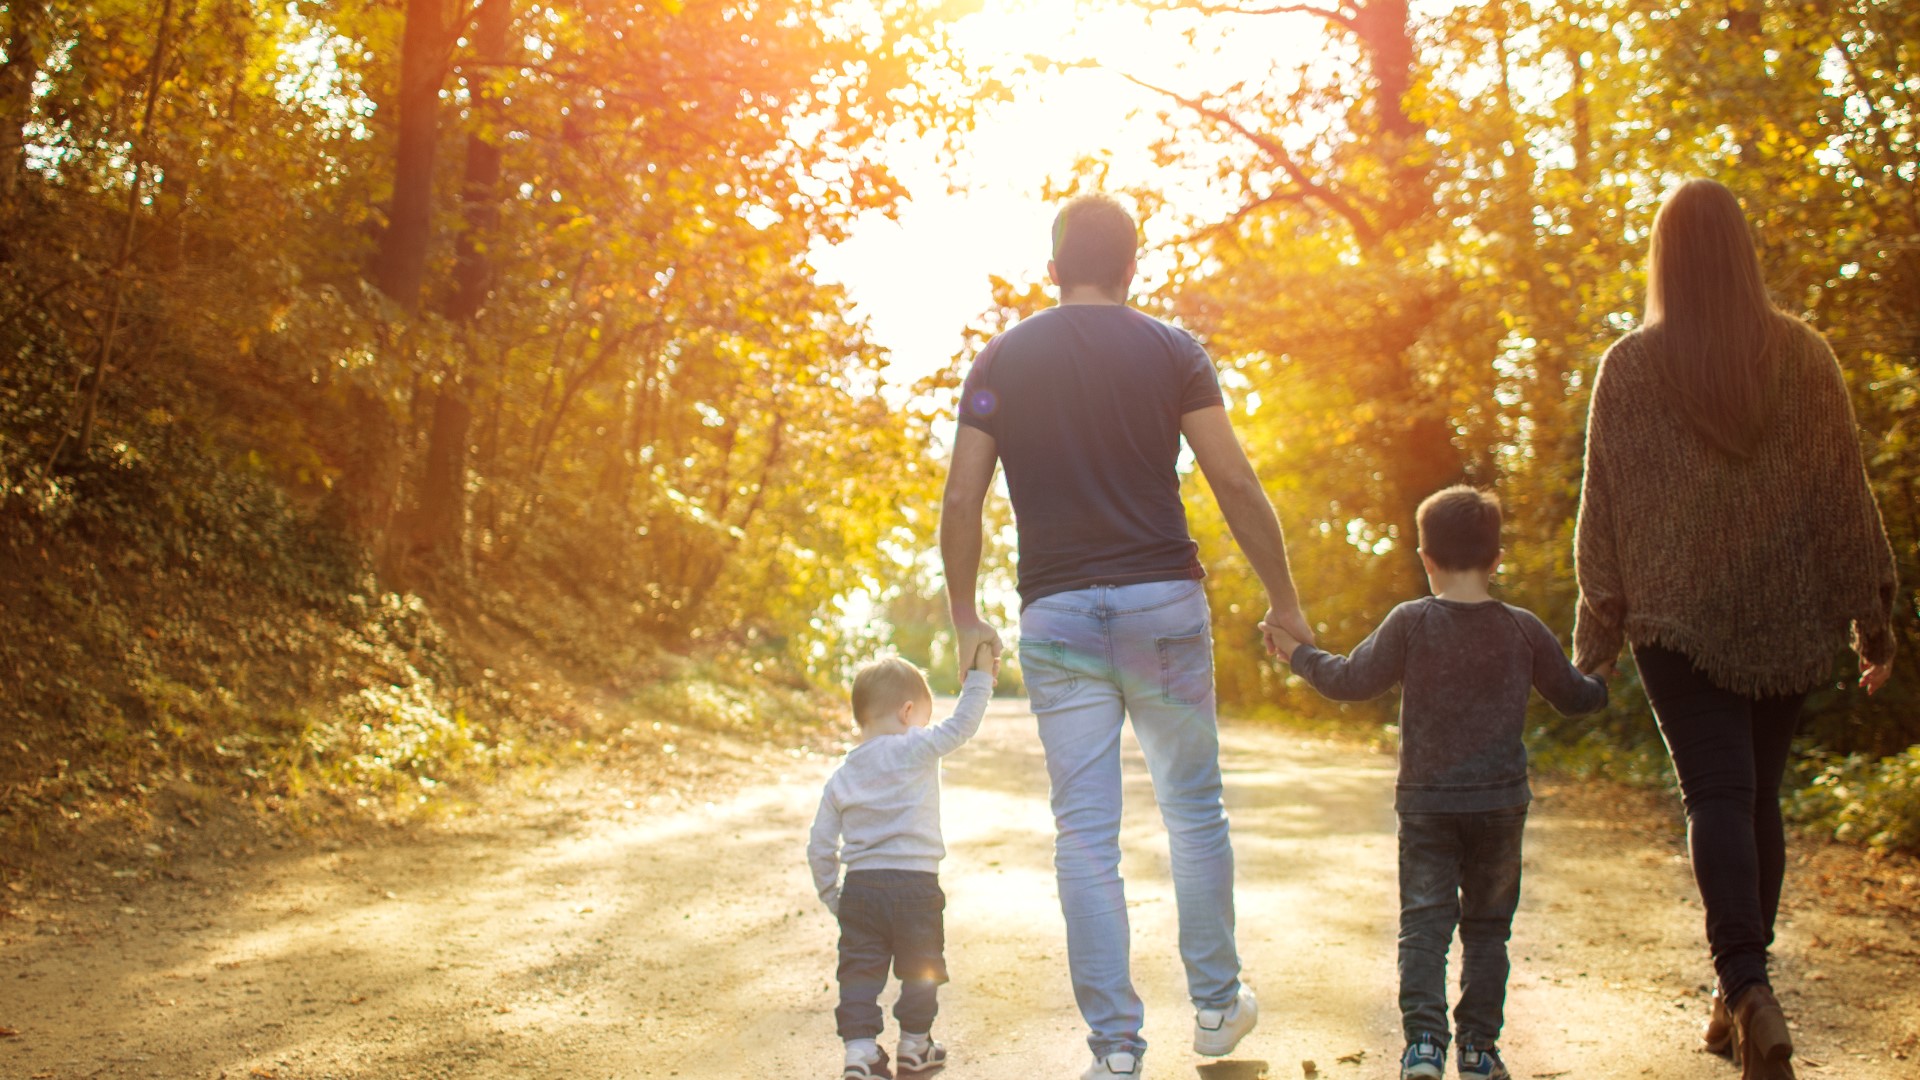 Professor of Marriage and Family Therapy, Dr. Diane Gehart, shares advice on how to prevent conflict on vacation and enjoy time with the family.